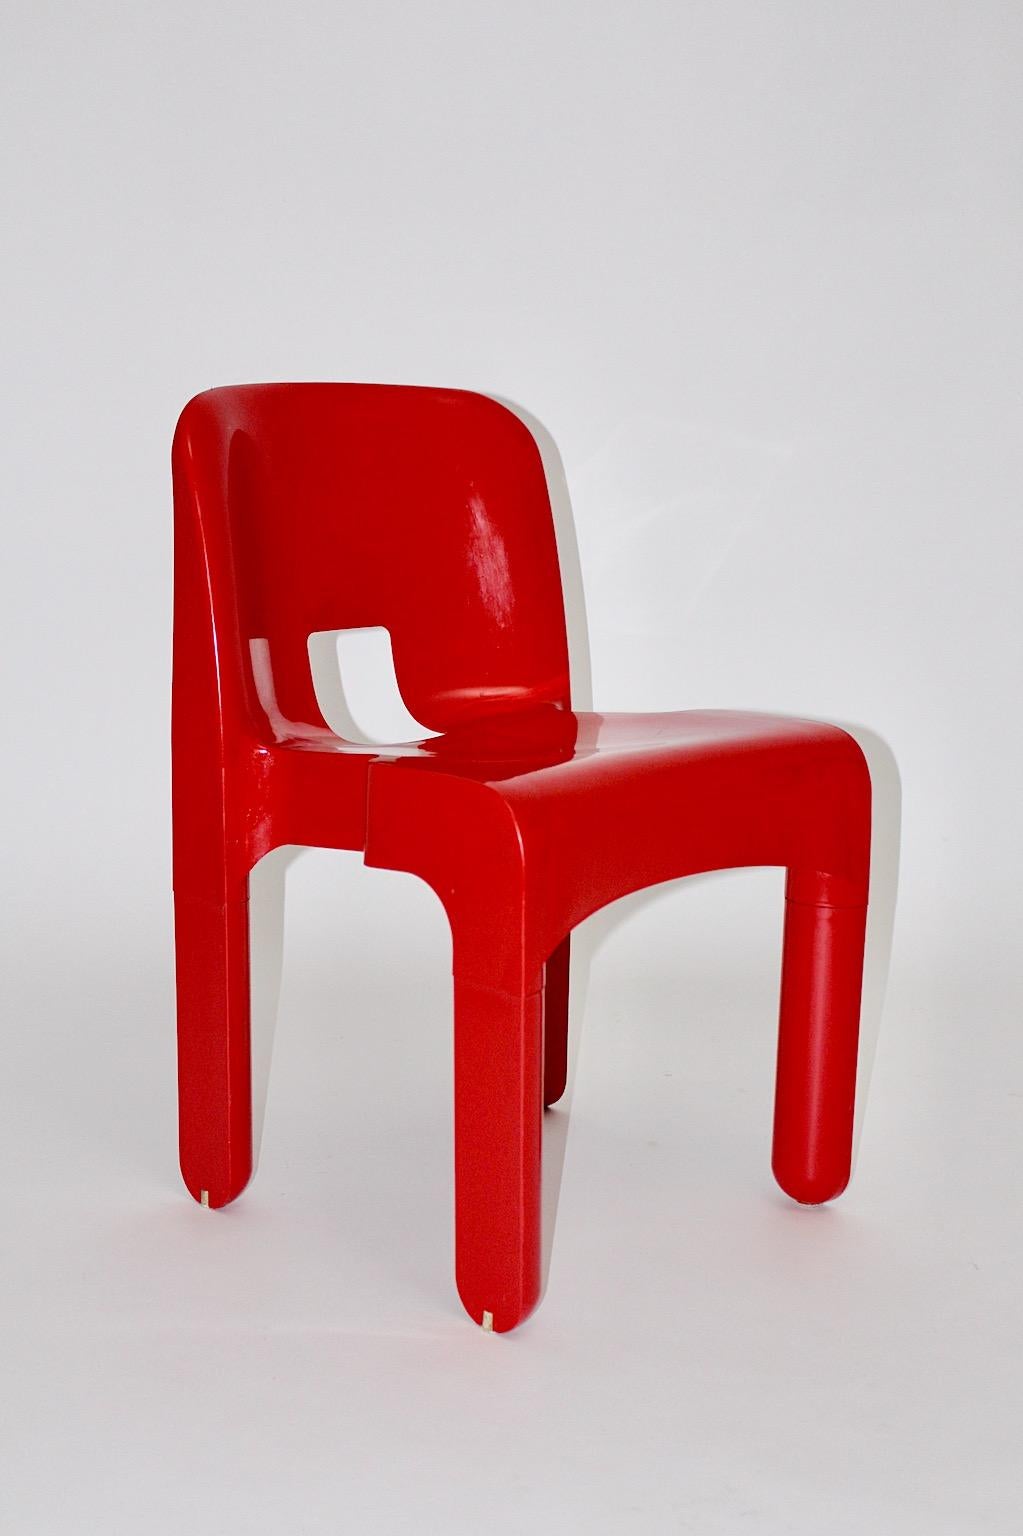 Joe Colombo Space Age red vintage plastic chair, which was designed 1965 - 1967 Italy named Model 4869 Universale and produced by Kartell Milano.
The chair model Universale is labeled underneath.
Joe Colombo (1930-1971) created in his short career